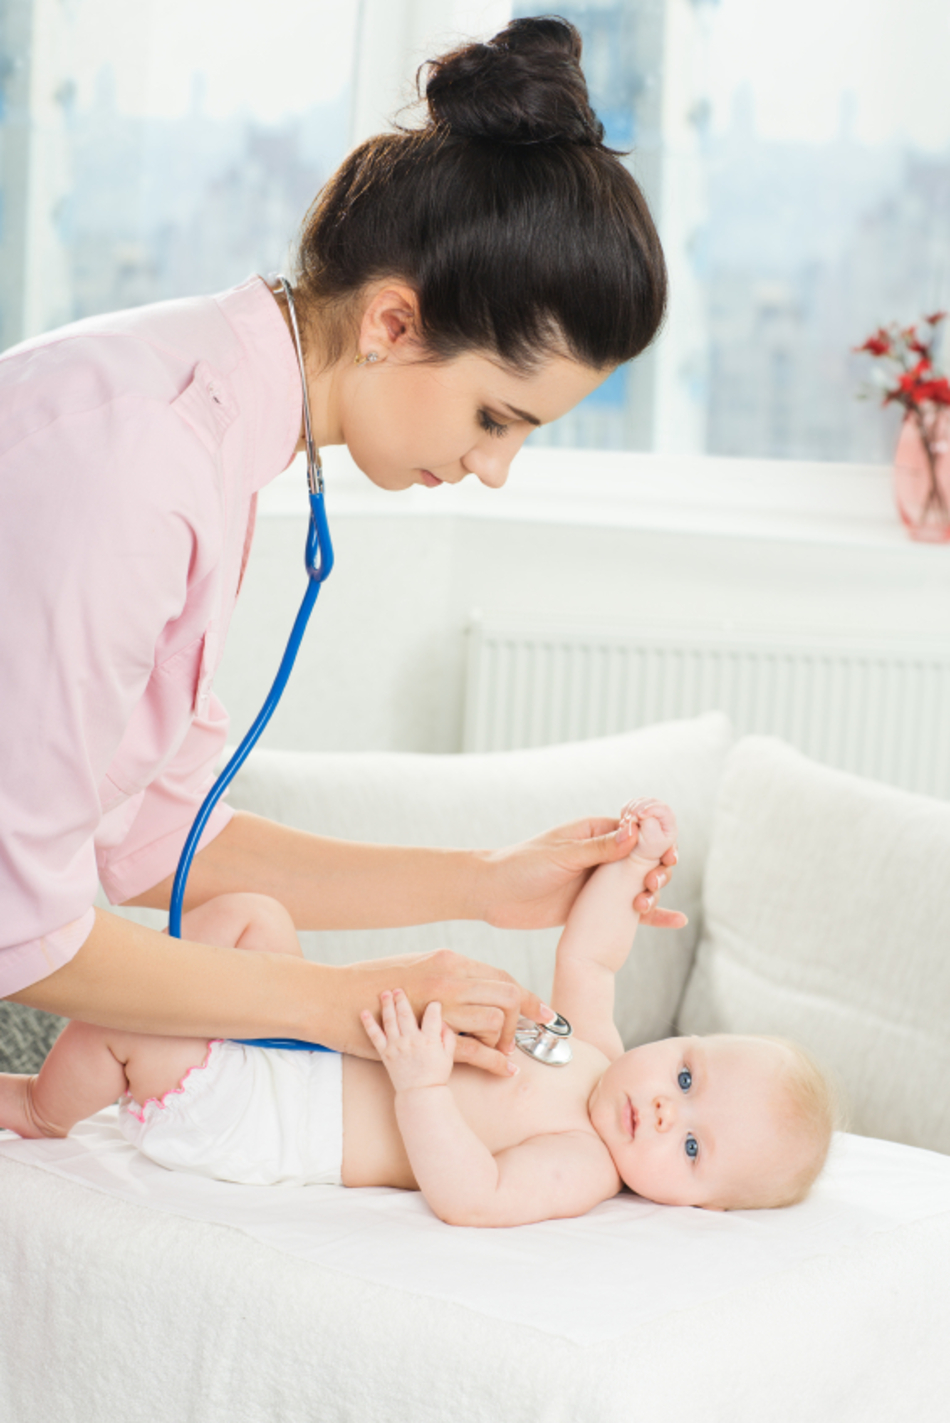 Newborn Visits: Let the Doctors Come to You and Your New Baby